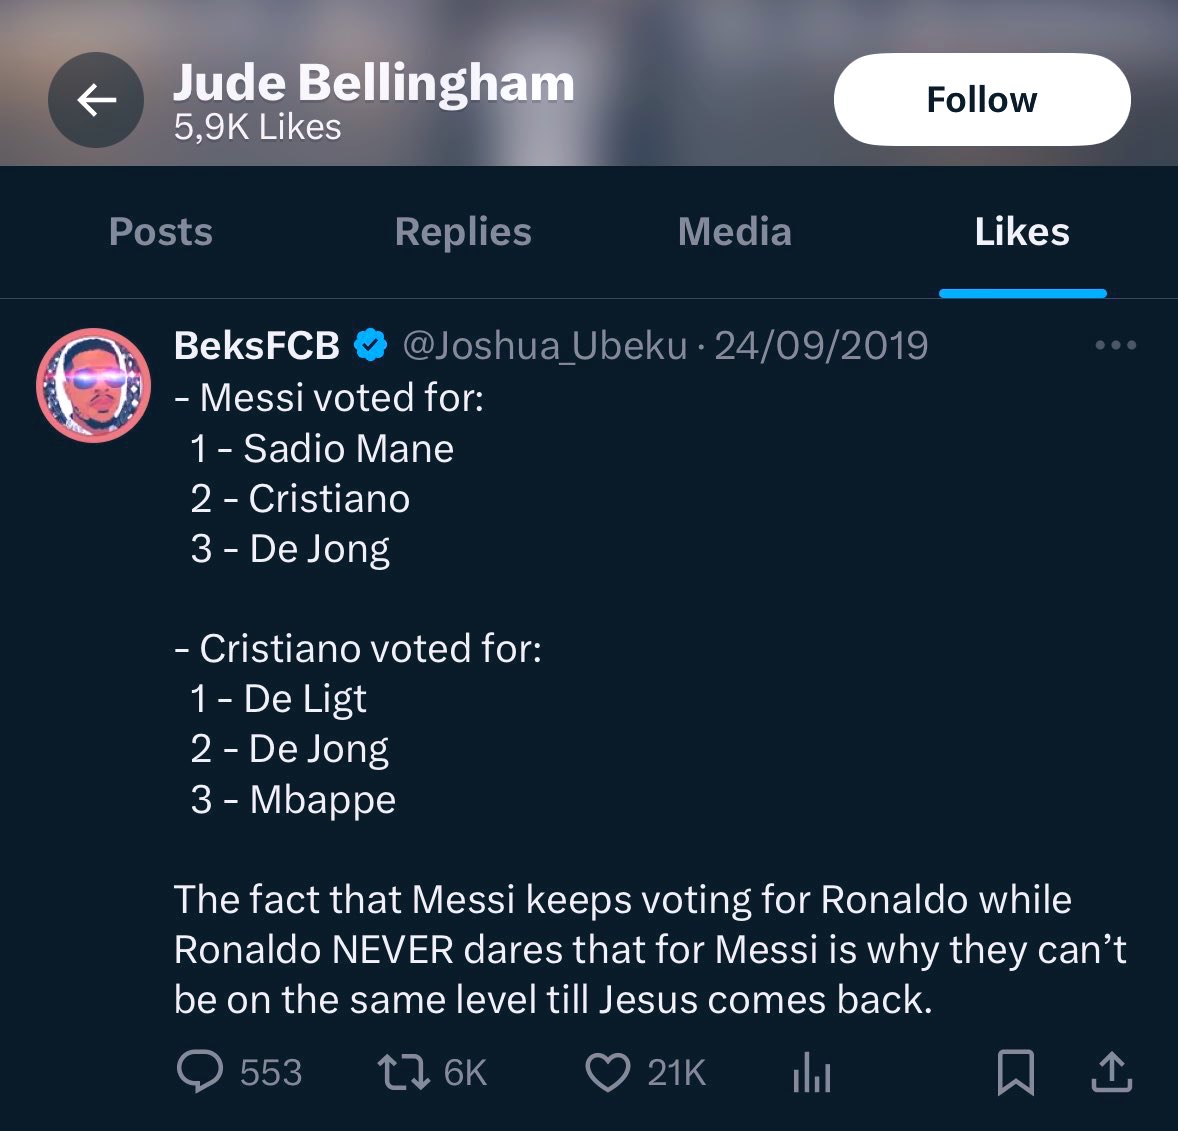 Bellingham might have been a bigger Ronaldo hater than anyone on this app 'cause how tf was he liking BeksFCB tweets 😭😭😭😭